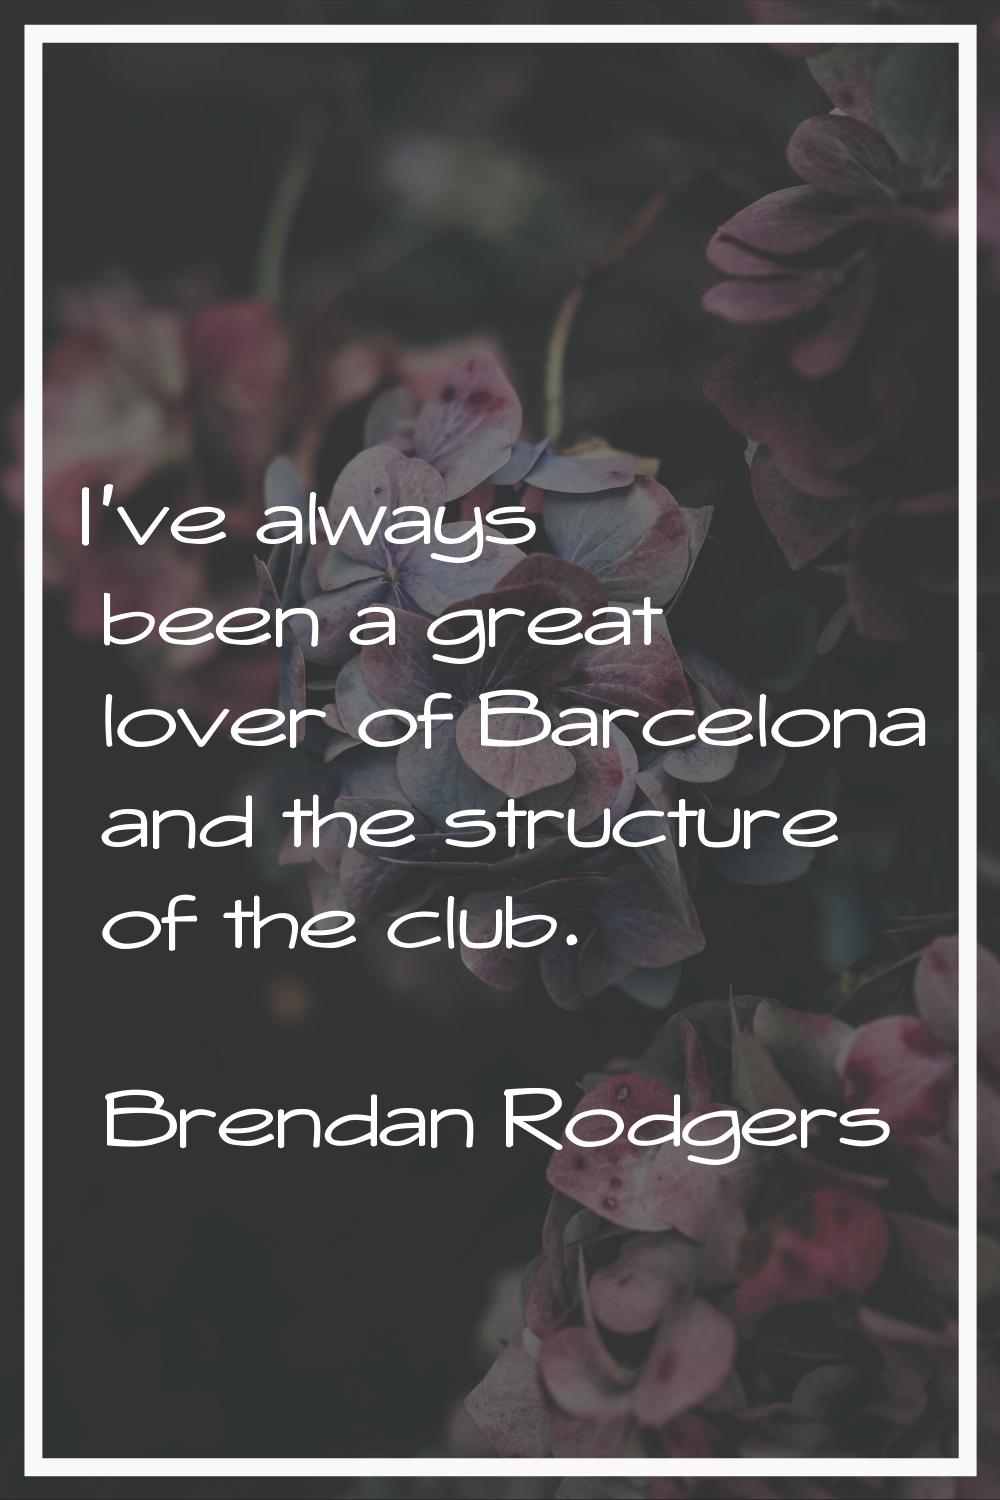 I've always been a great lover of Barcelona and the structure of the club.